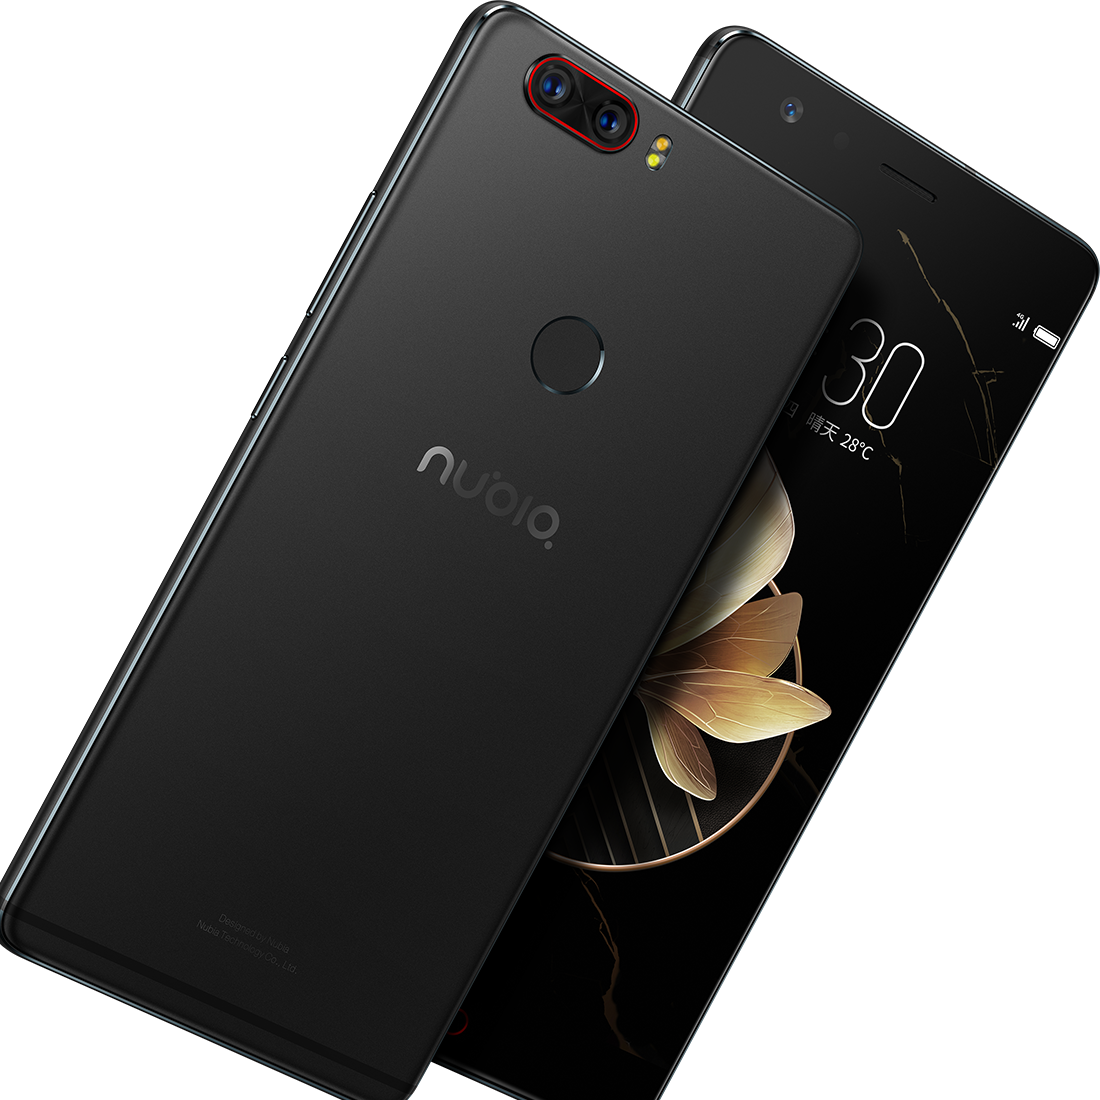 Nubia Z17 official 01